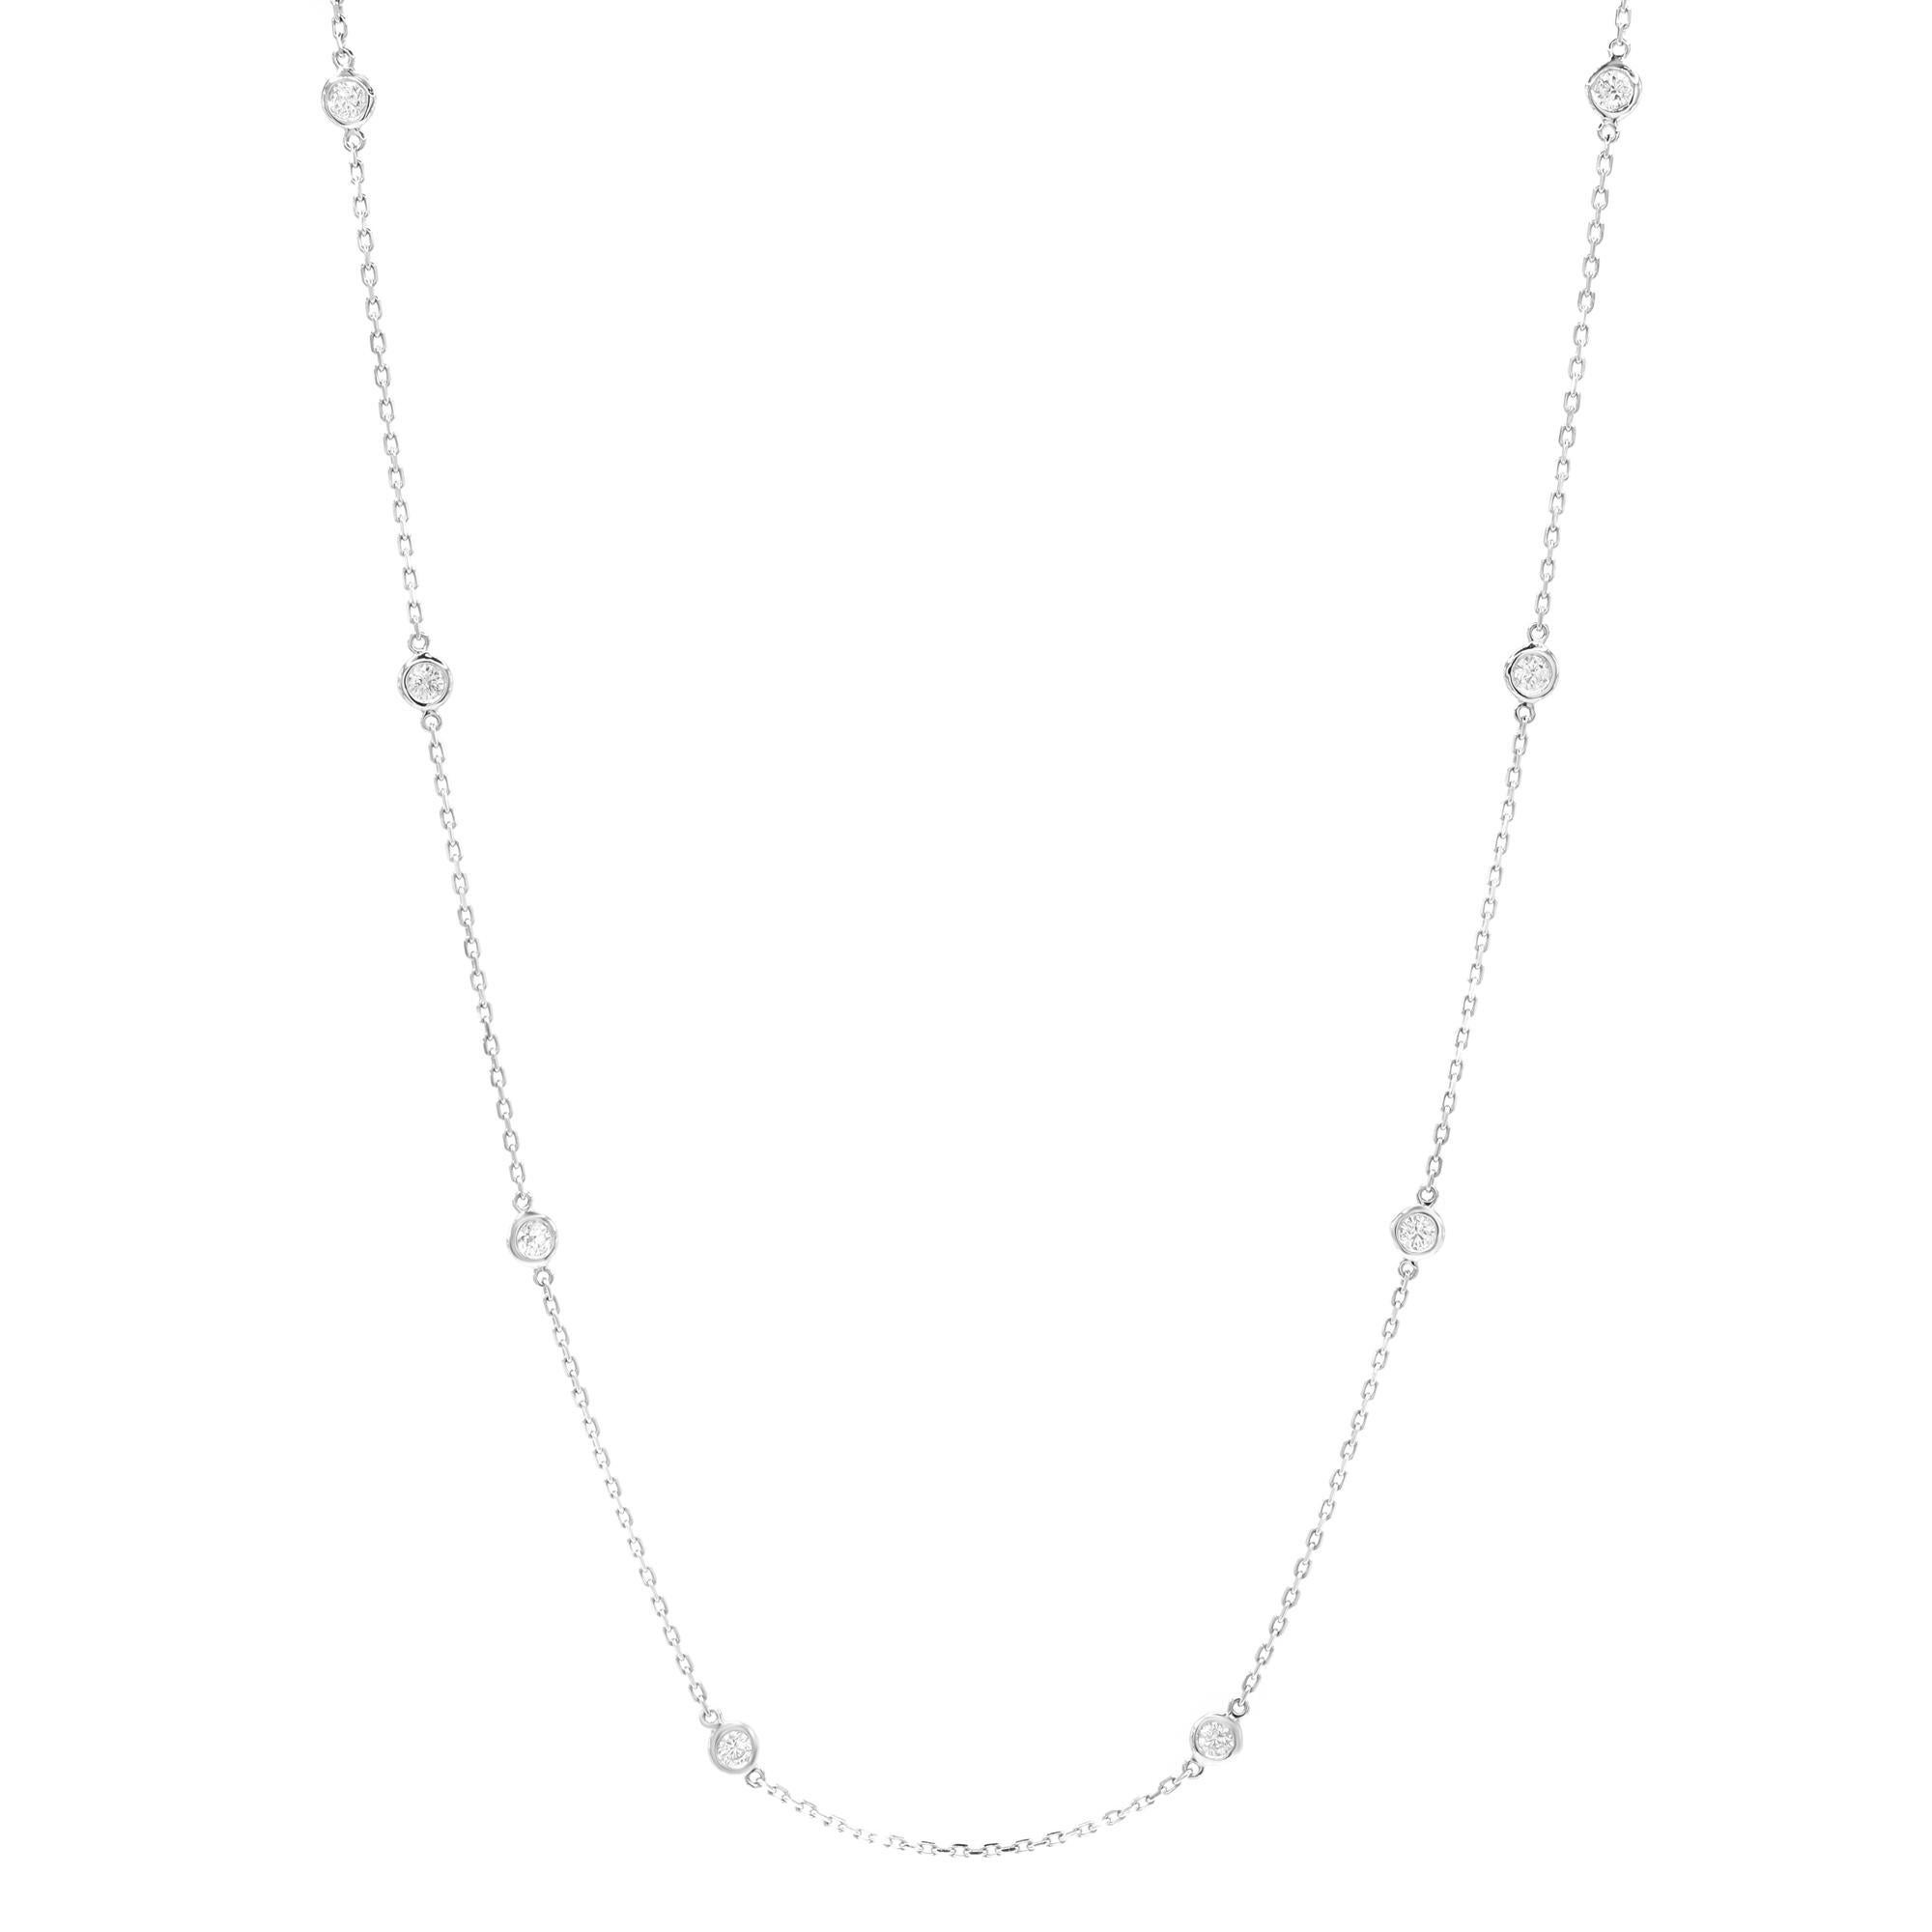 (05945) 

Stunning custom design 14k white gold natural diamond by the yard necklace. Bezel set with 10 round brilliant diamonds weighing 0.70cttw. Diamonds are nearly colorless with G-H color, and VS-SI clarity. Chain length: 18 inches. Comes with